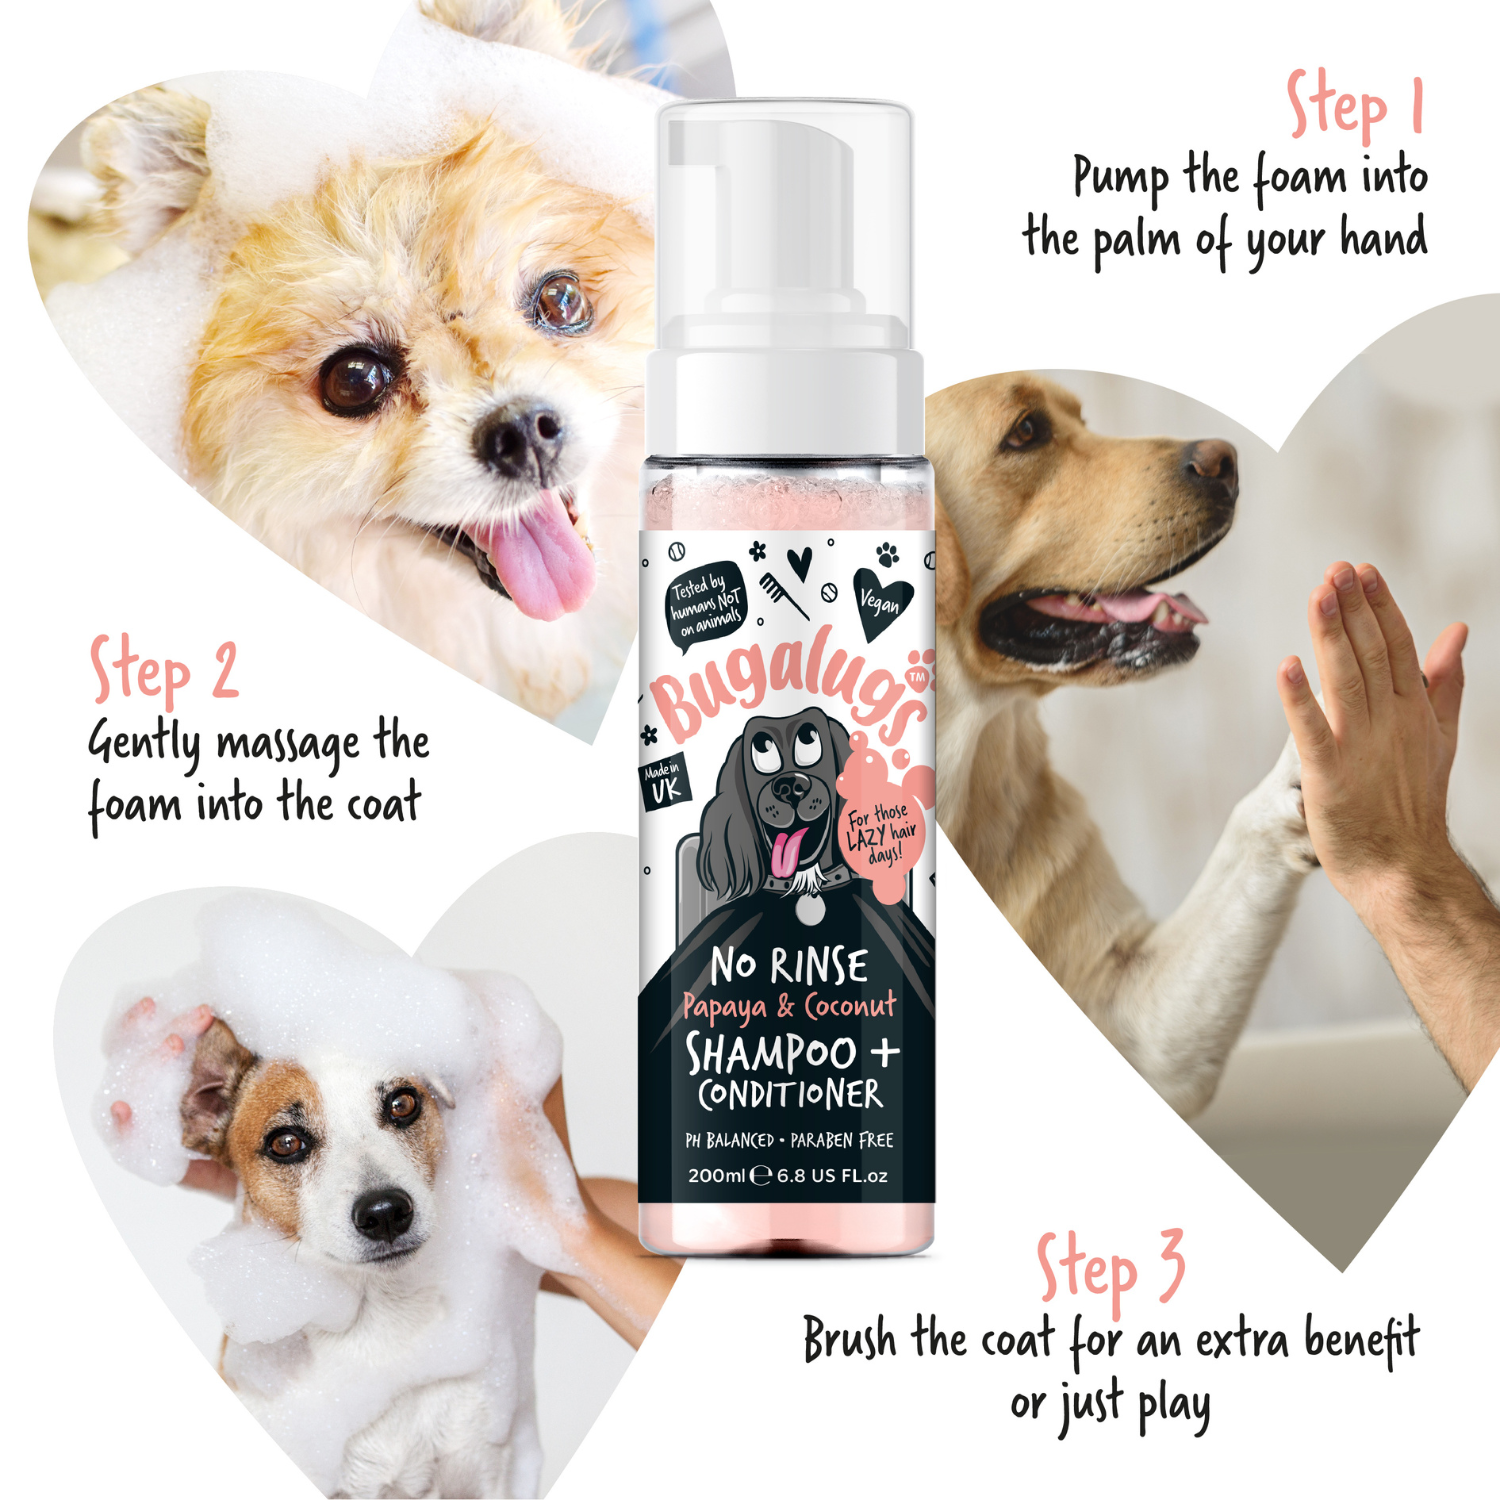 Bugalugs No Rinse Papaya and Coconut Shampoo and Conditioner for Dogs - How to use - 3 steps